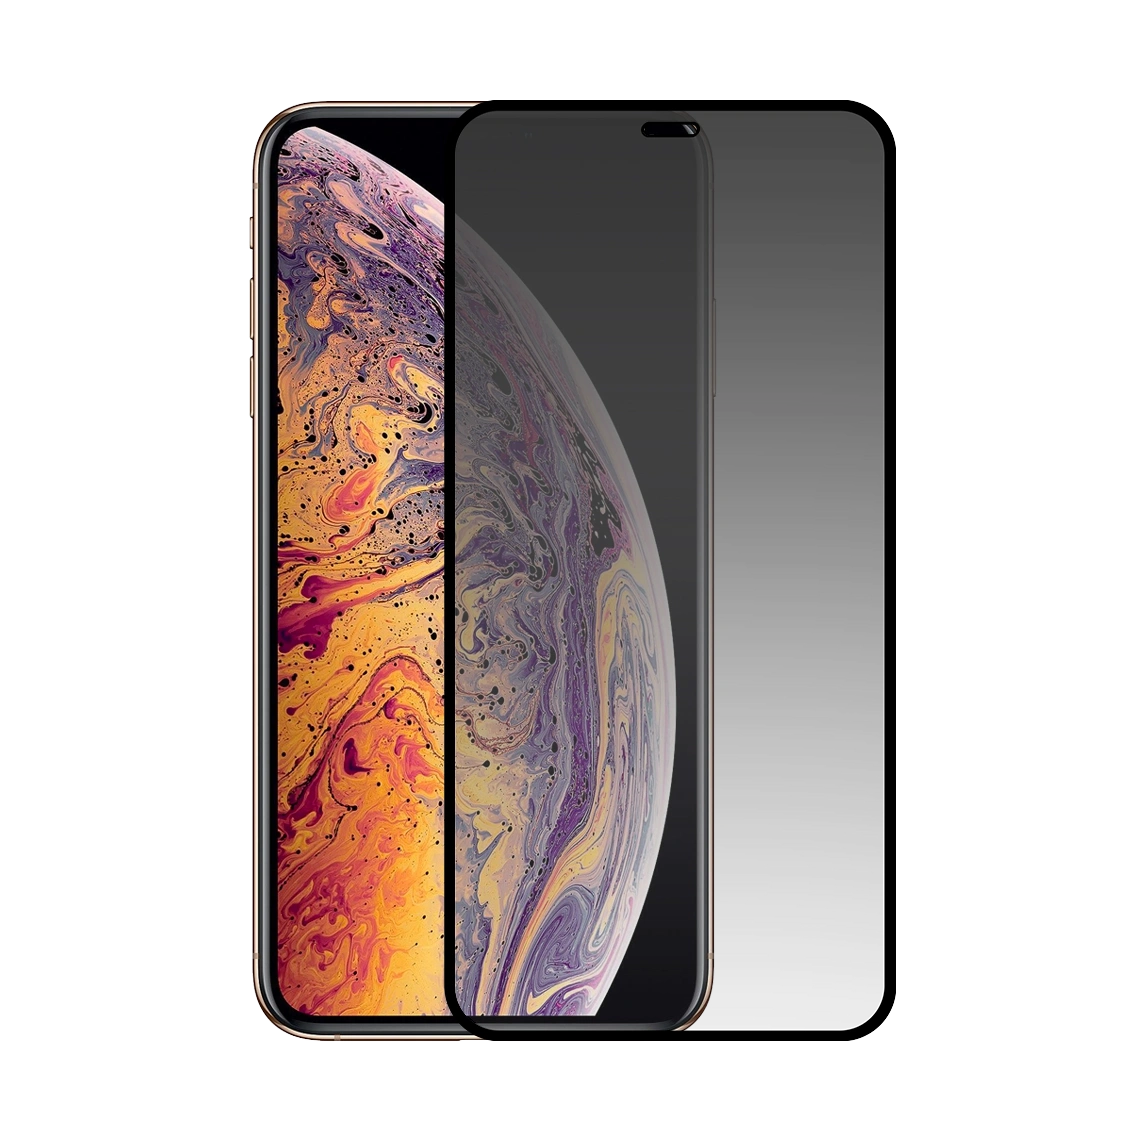 privacy-screen-protector-for-xs-max-11-pro-max